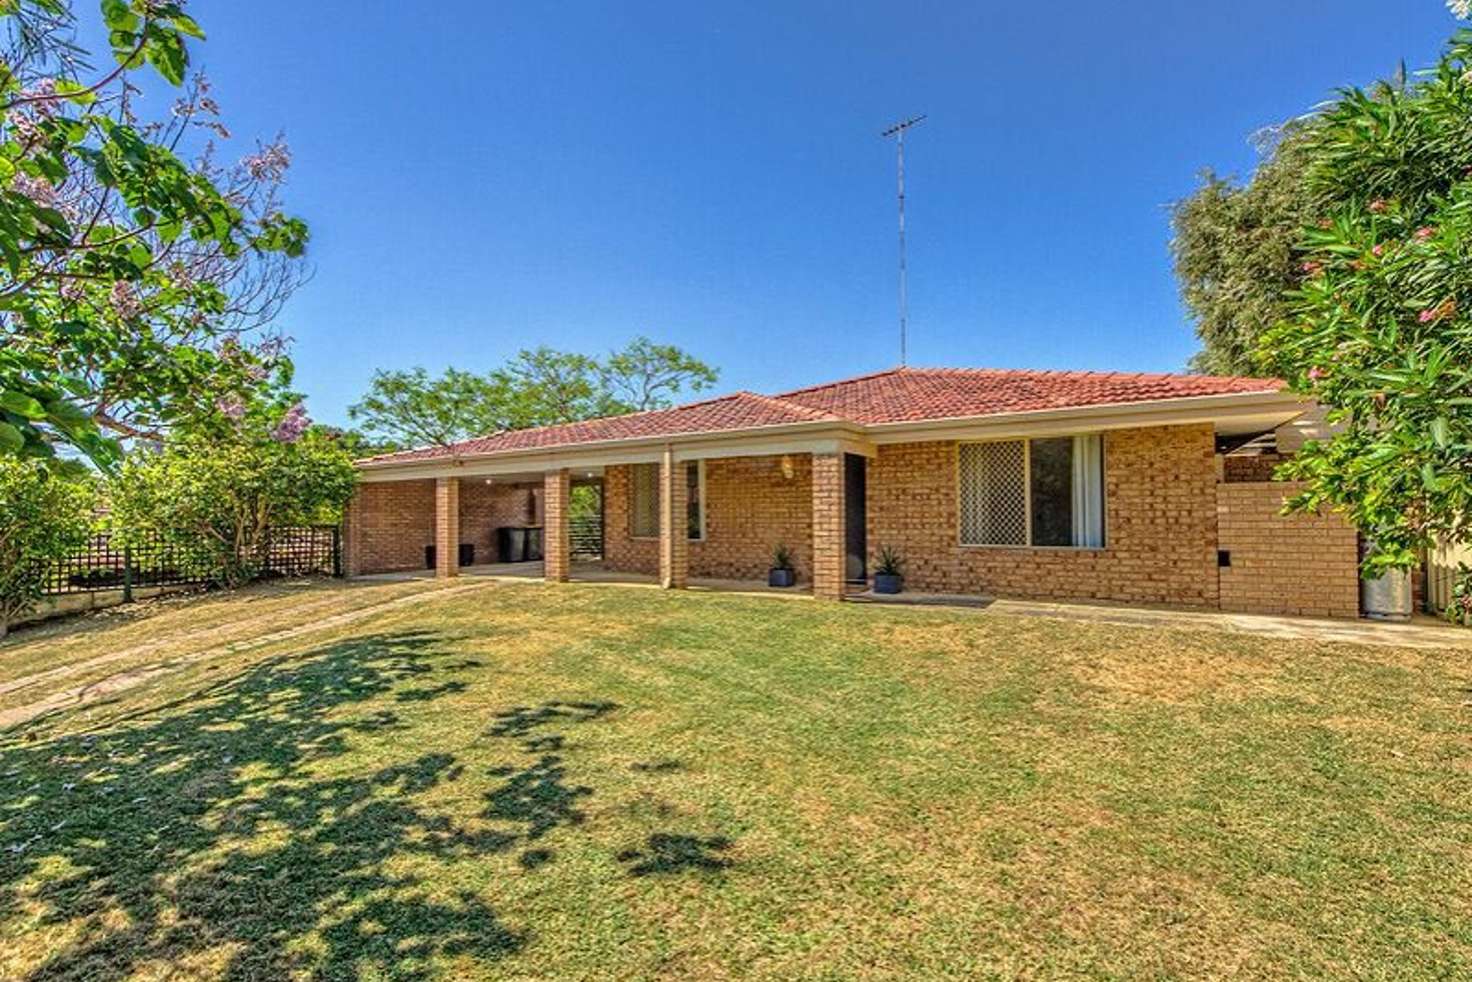 Main view of Homely house listing, 6 Kaiber Avenue, Yanchep WA 6035